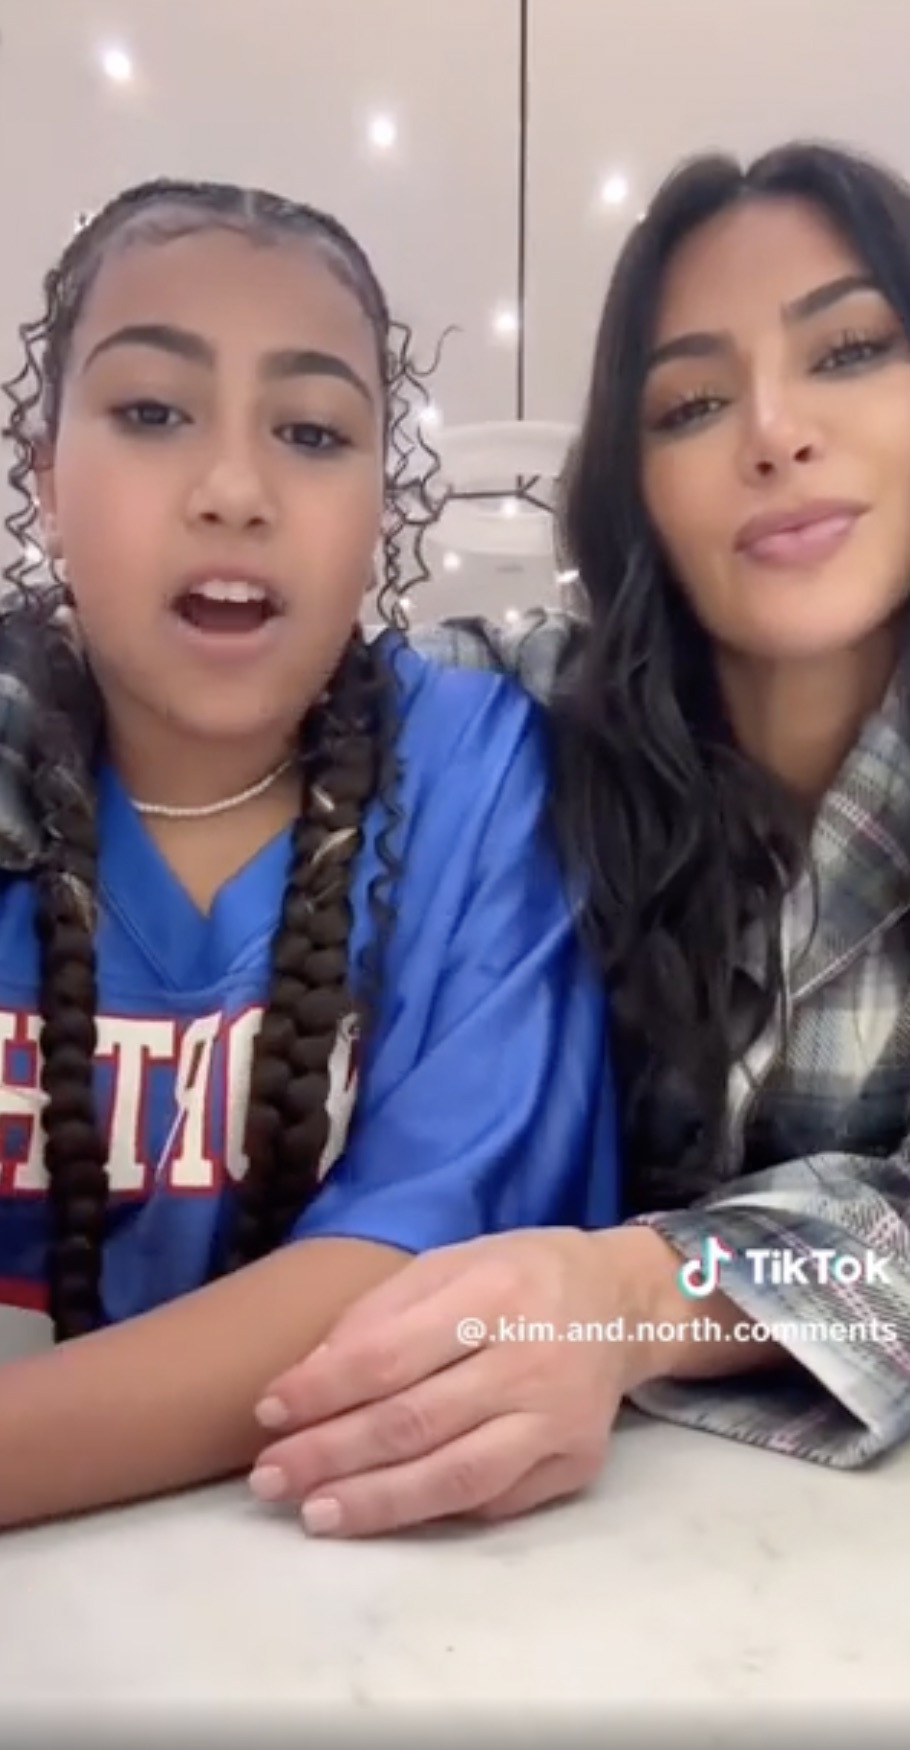 The video showed North wearing a blue jersey with her makeup done and curly hair styled in two long braids